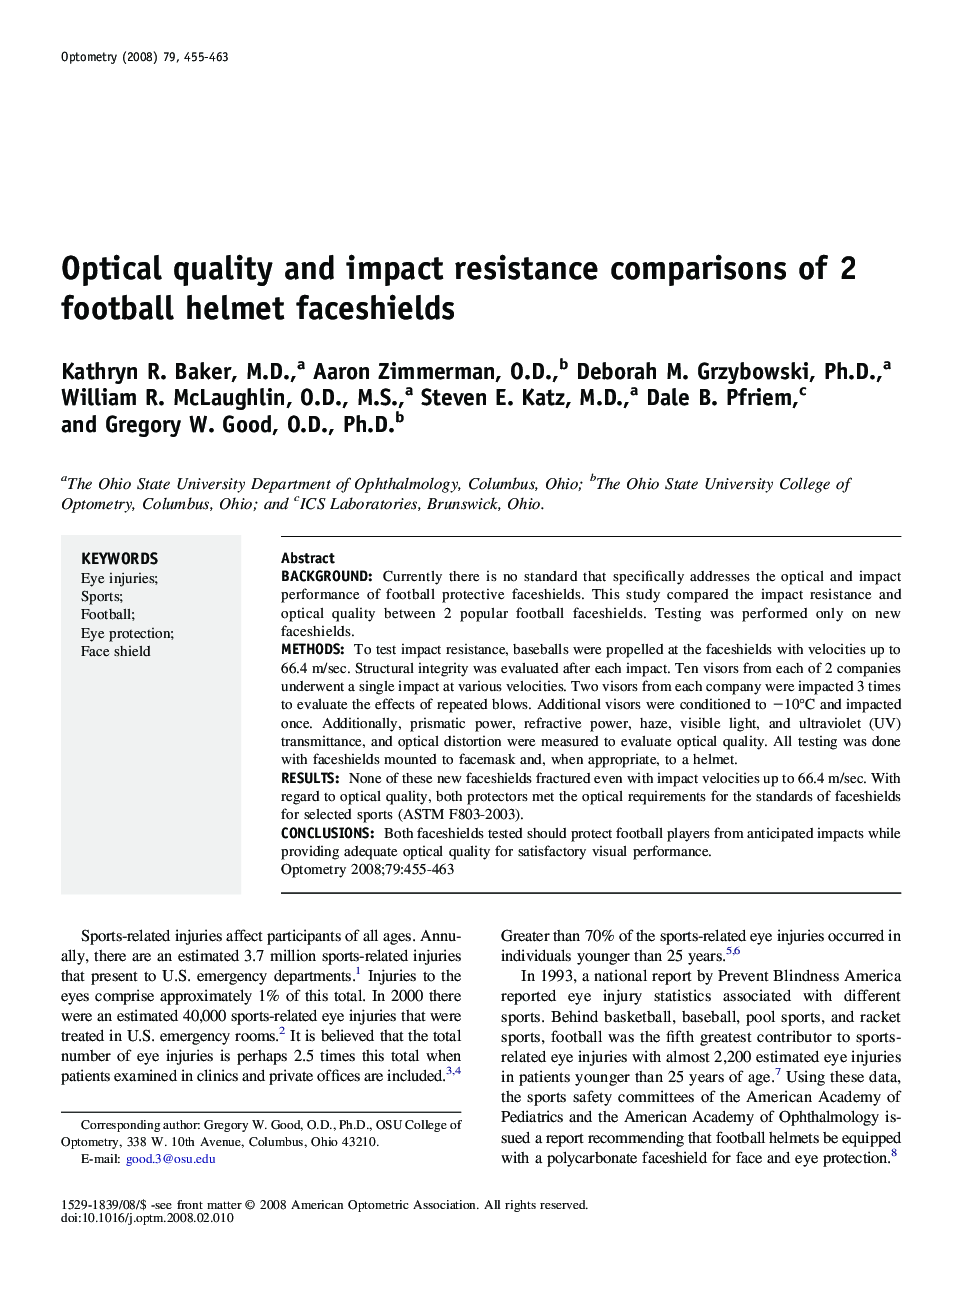 Optical quality and impact resistance comparisons of 2 football helmet faceshields